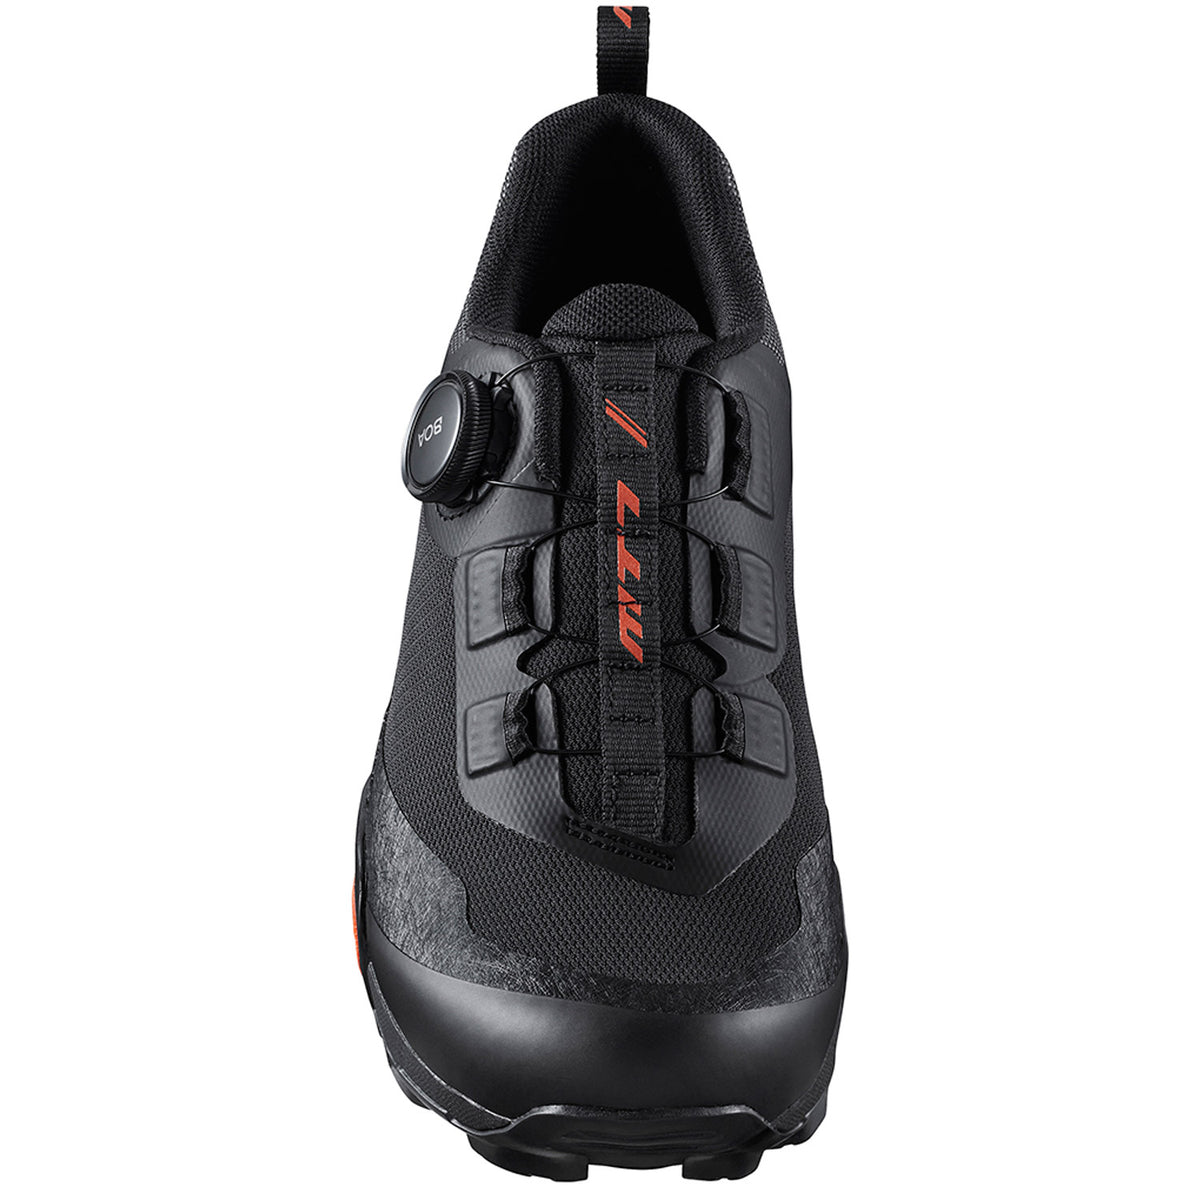 MT7 shoes - Black – All4cycling